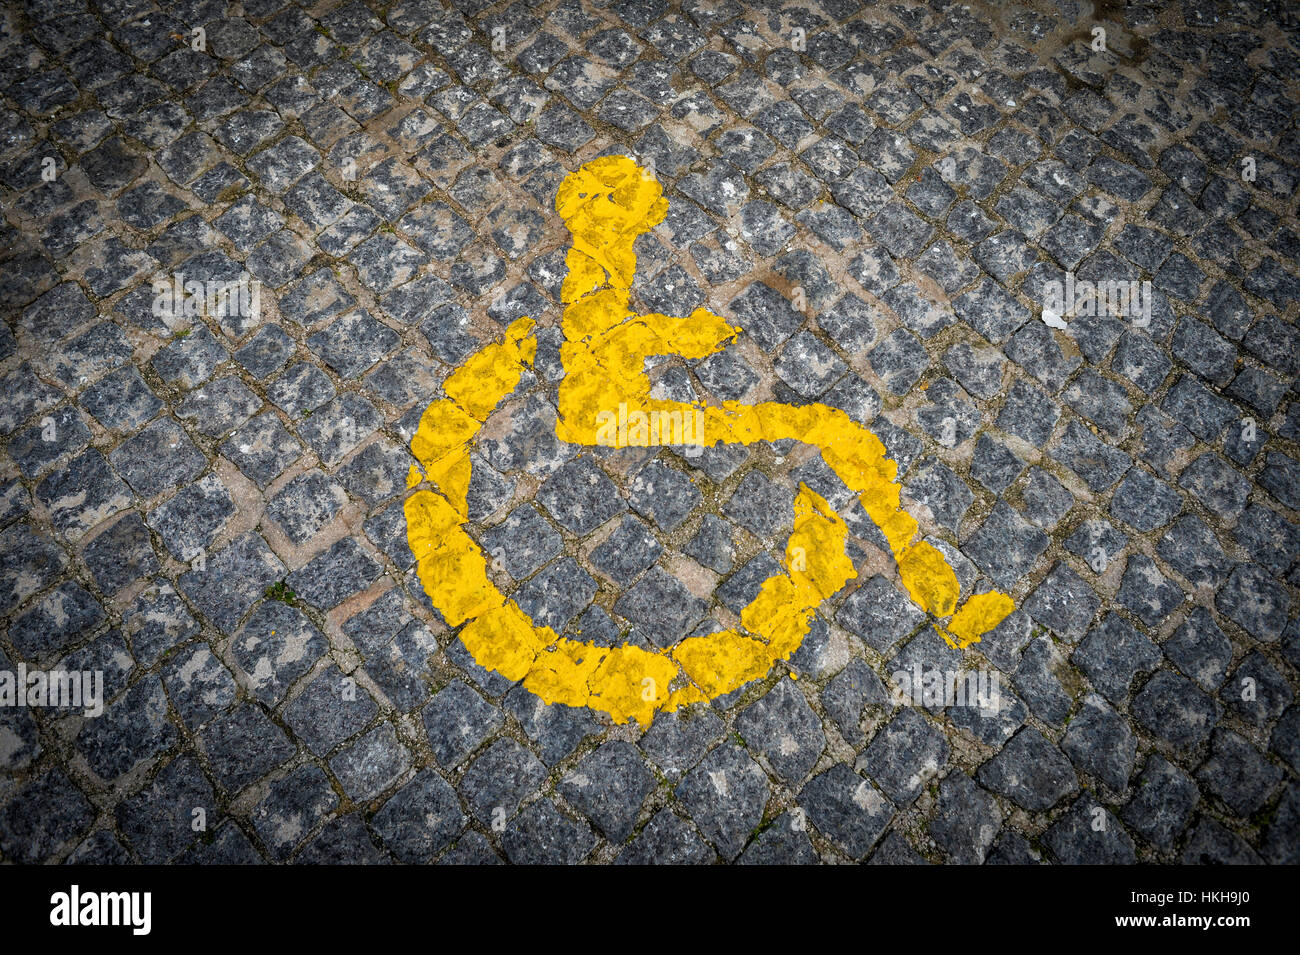 Disabled parking space with yellow painted sign Stock Photo